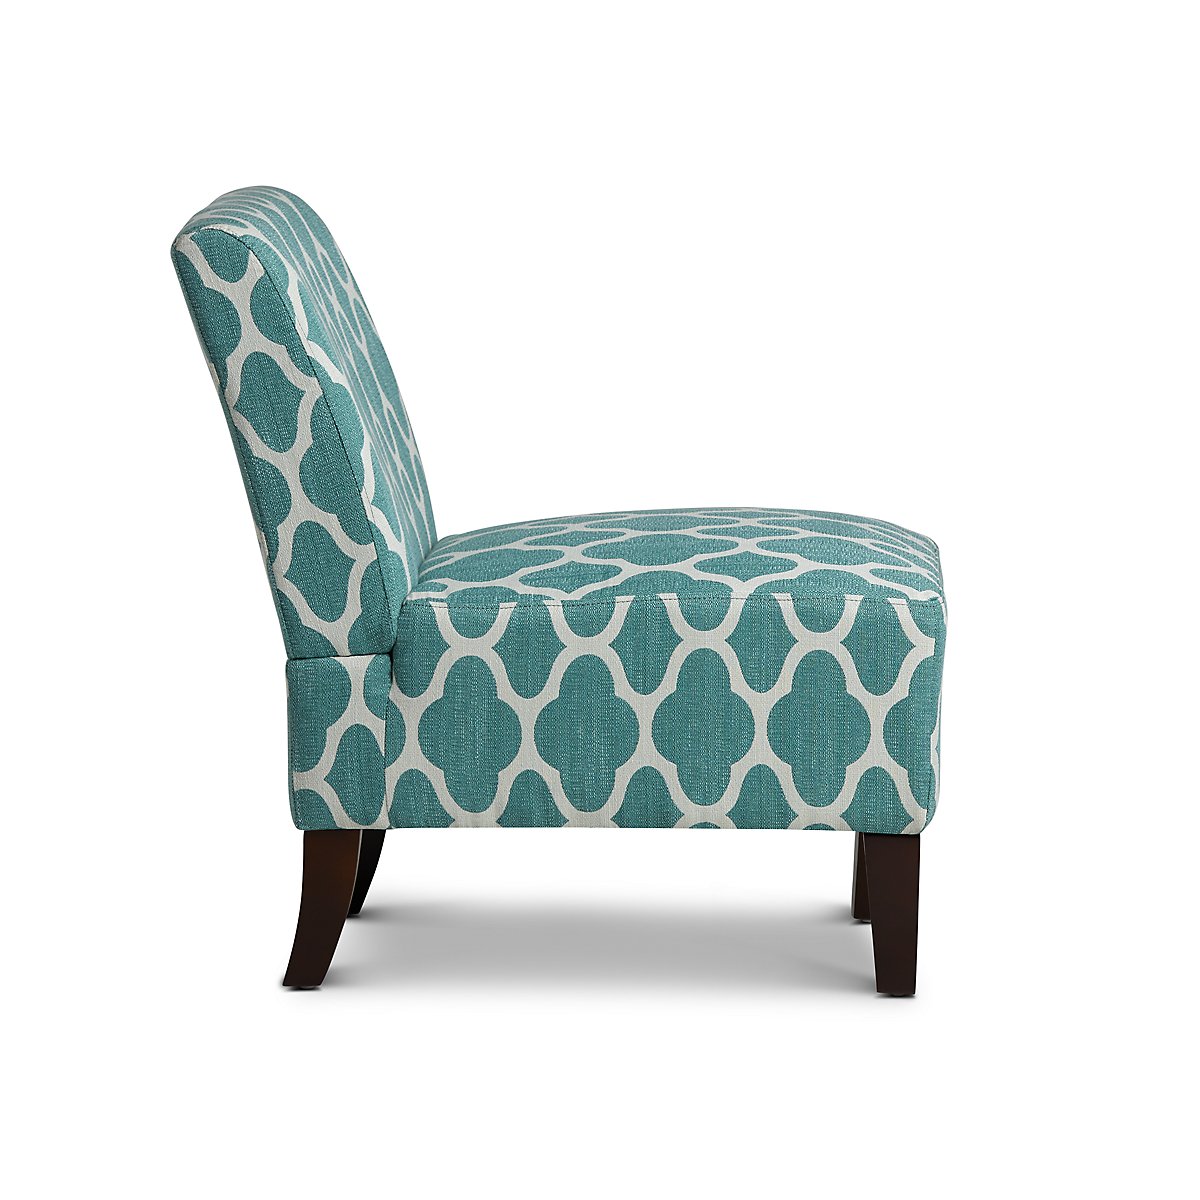 Comet Light Blue Fabric Accent Chair Living Room